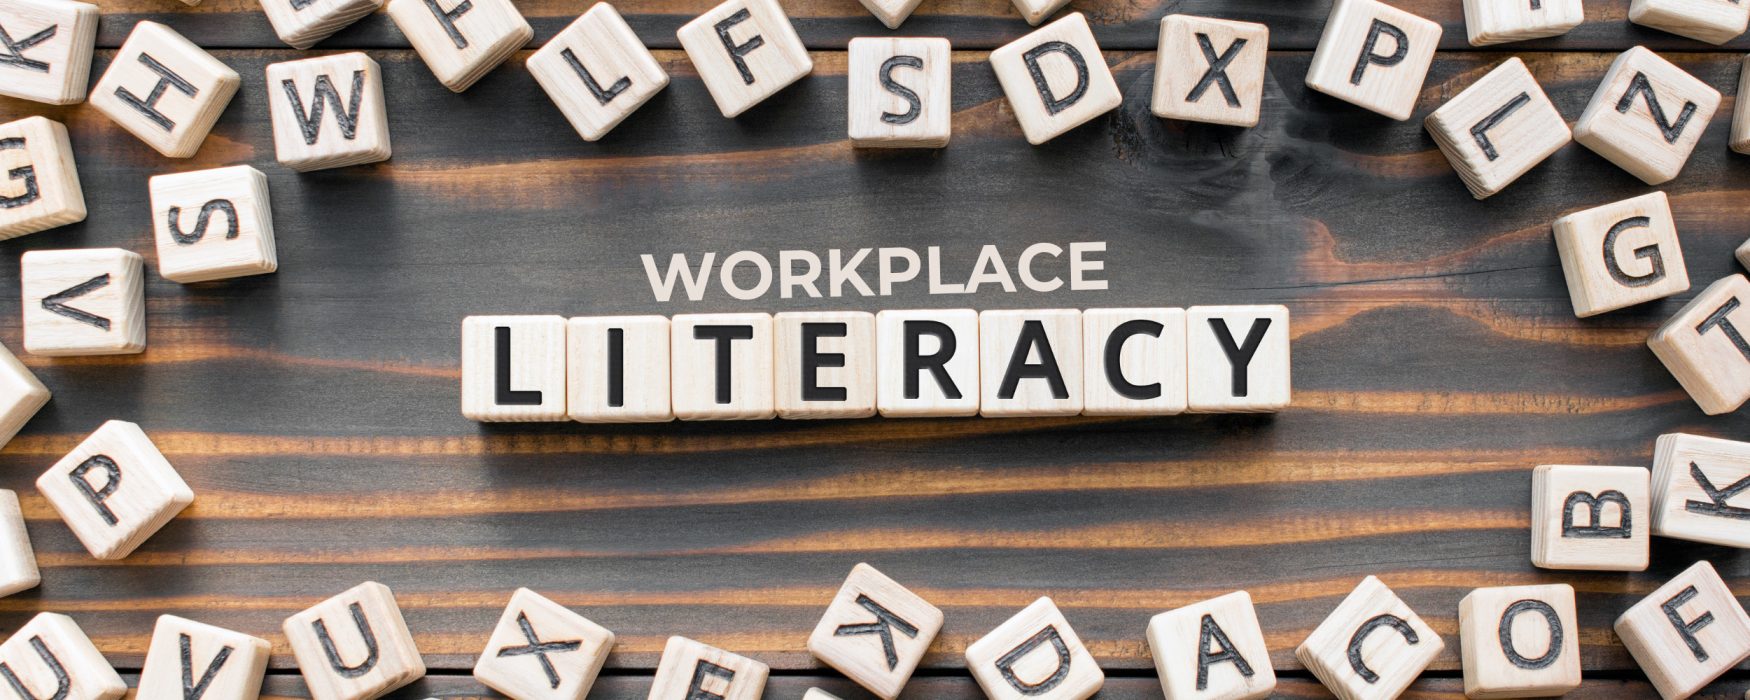 Image of lettered wooden blocks that spell out the words workplace literacy